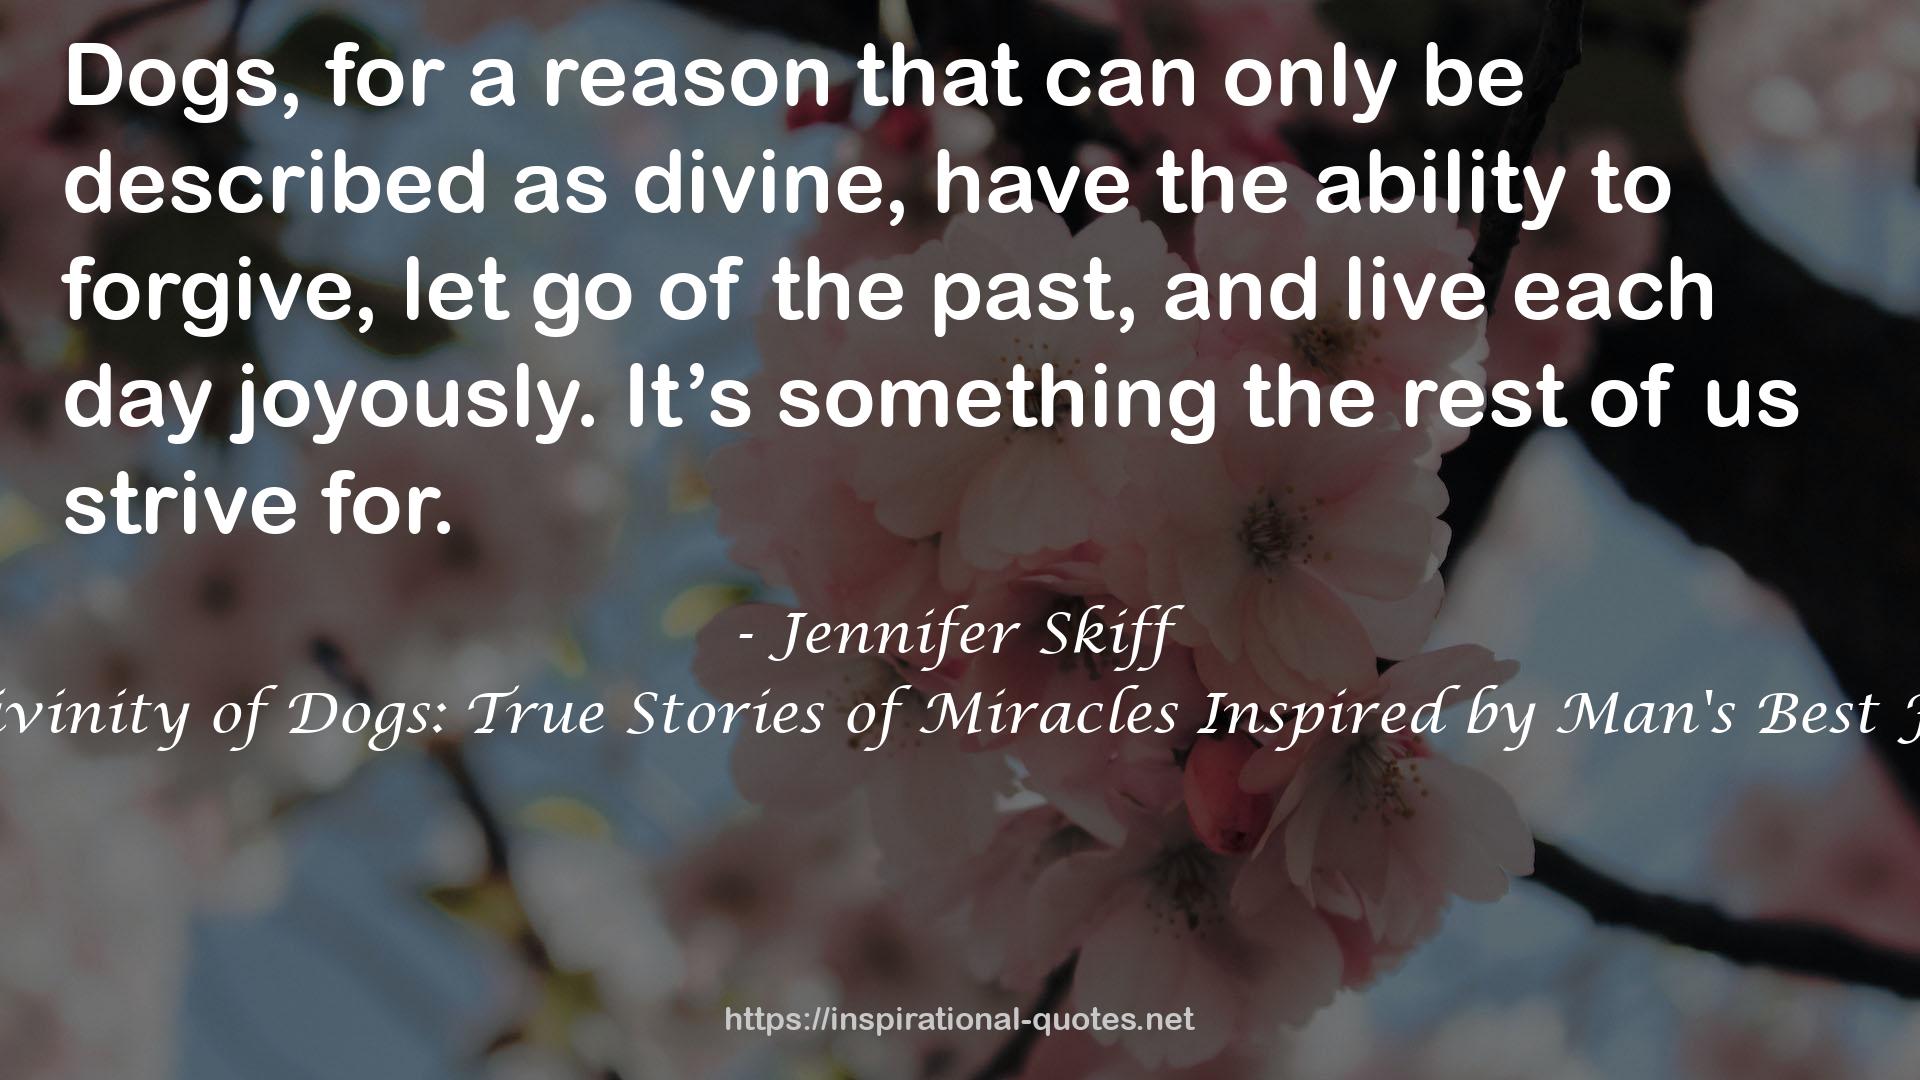 The Divinity of Dogs: True Stories of Miracles Inspired by Man's Best Friend QUOTES